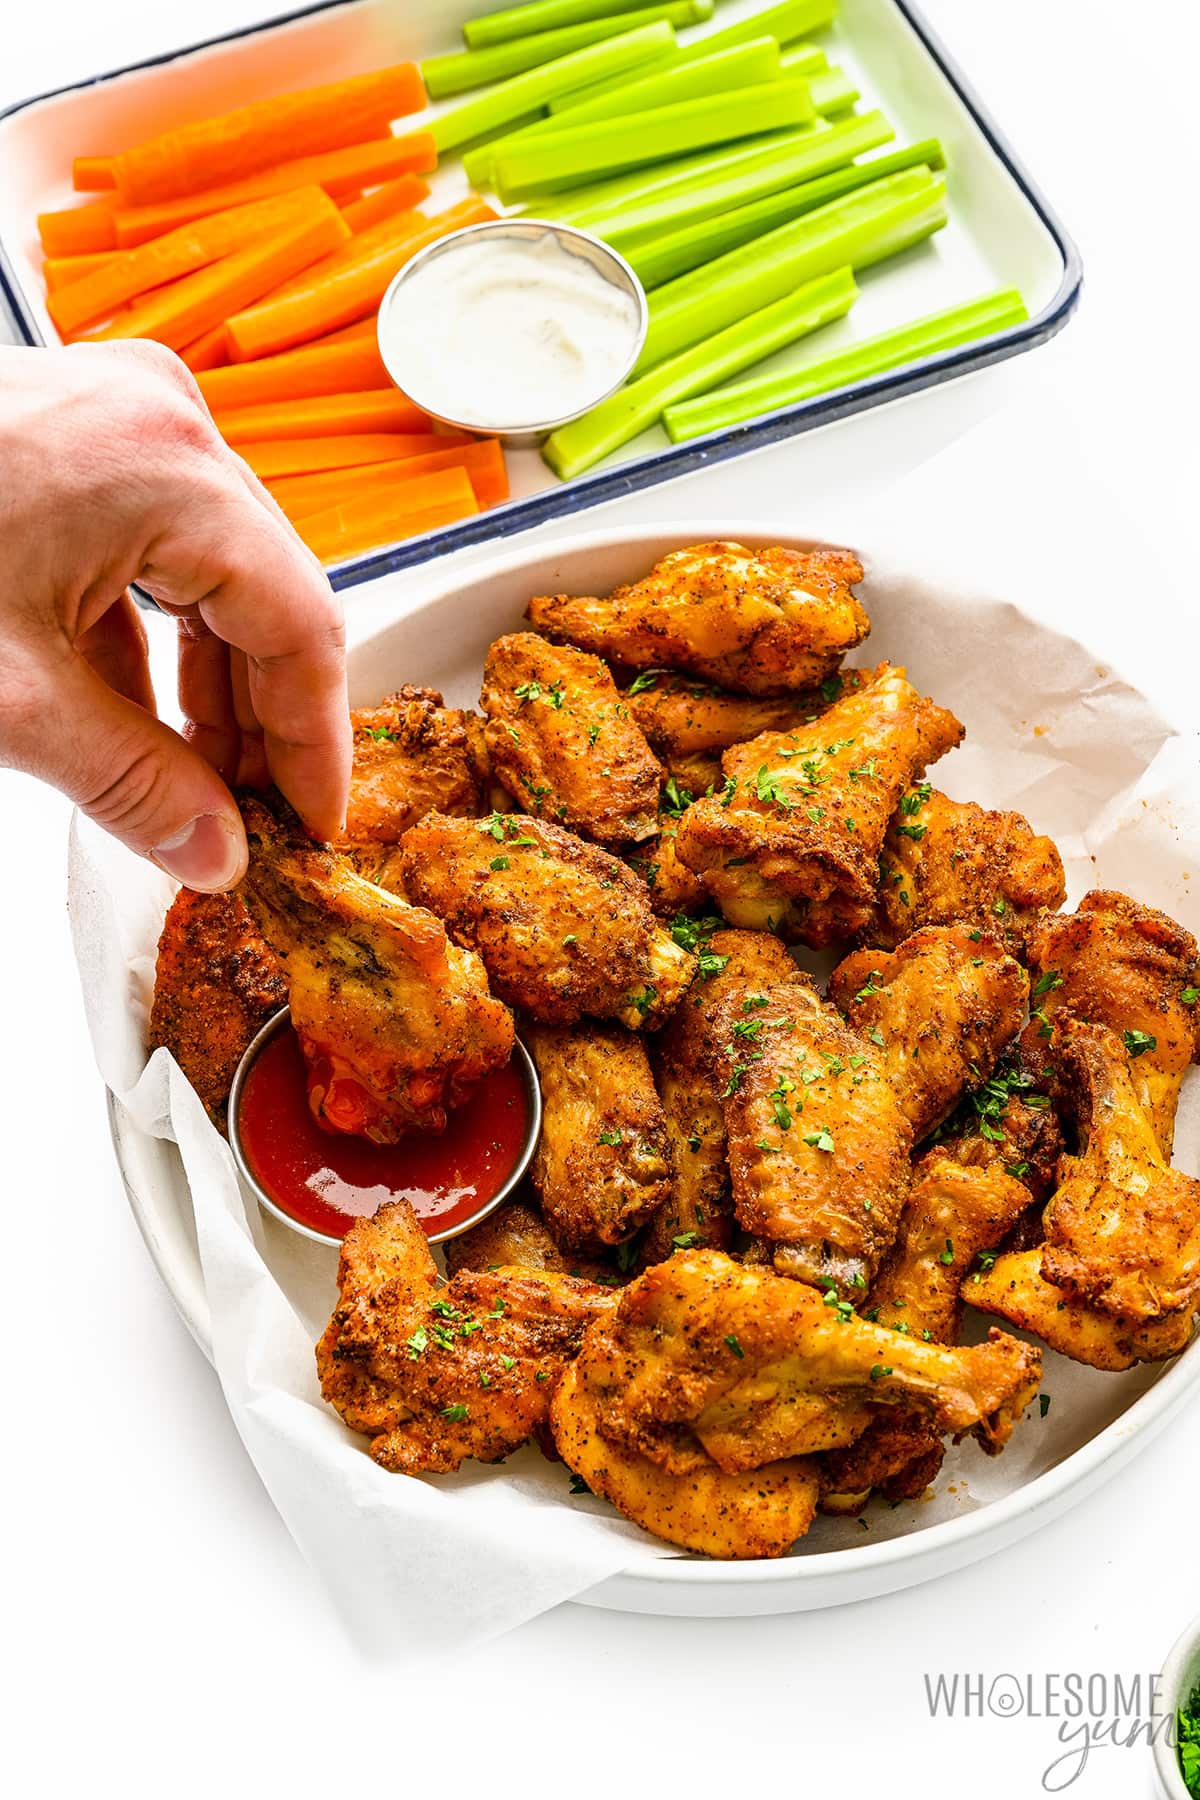 Crispy baked chicken wings dipped into sauce, next to platter of celery and carrots.